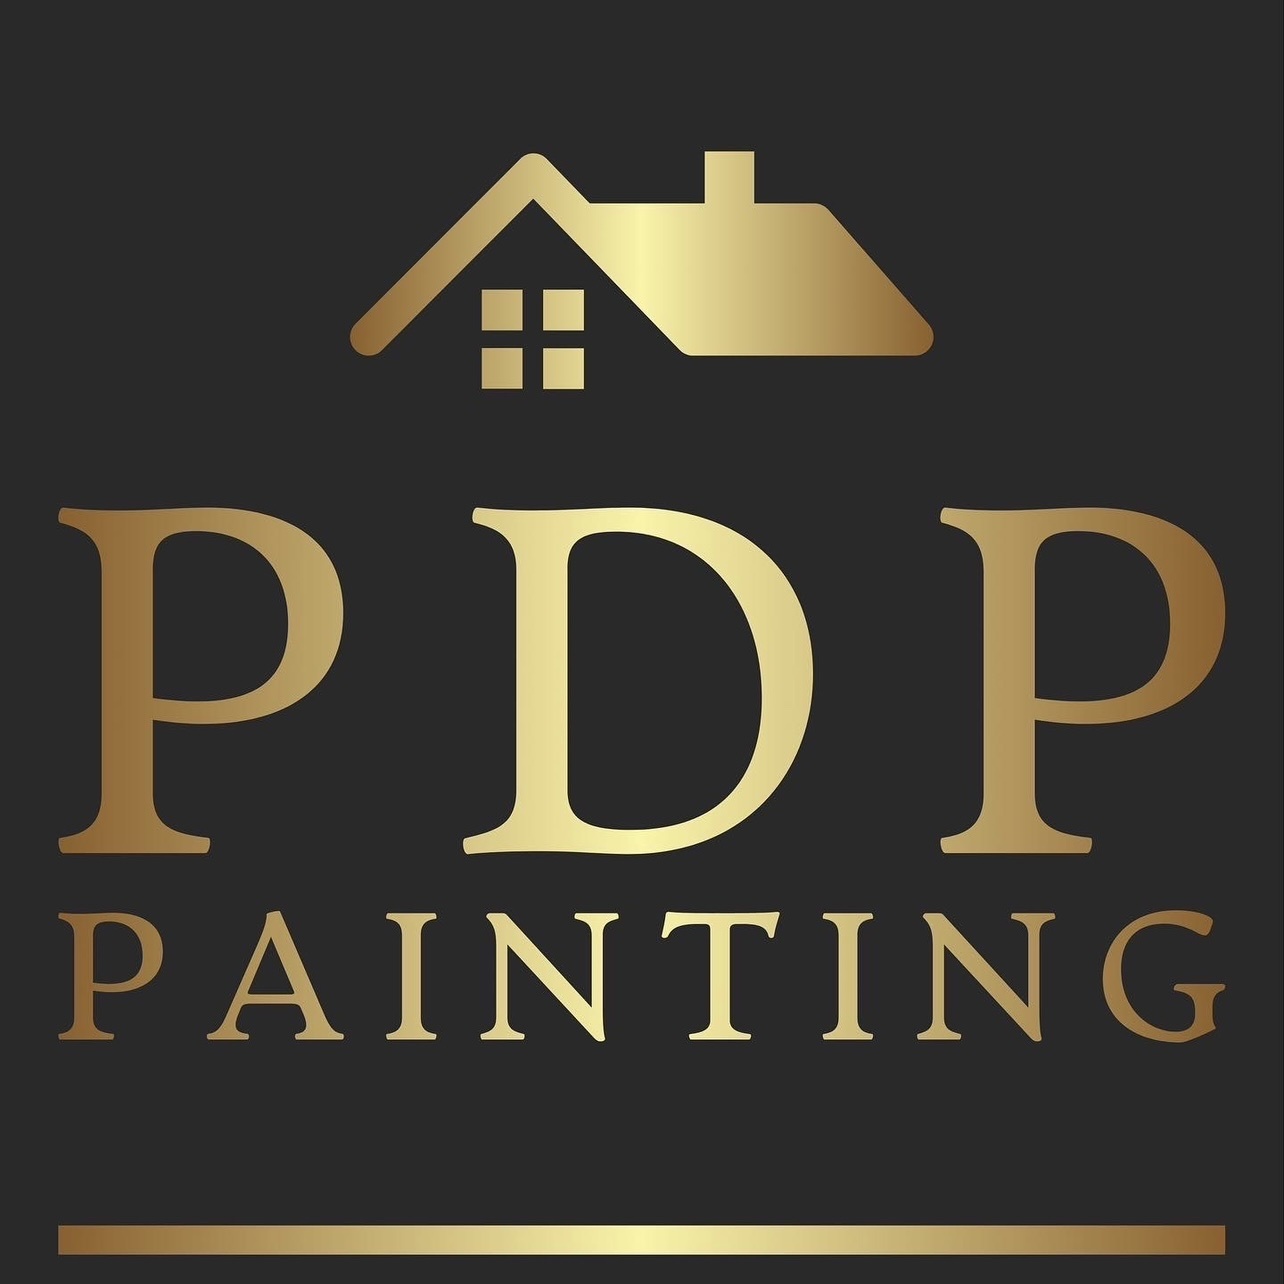 PDP Painting's logo